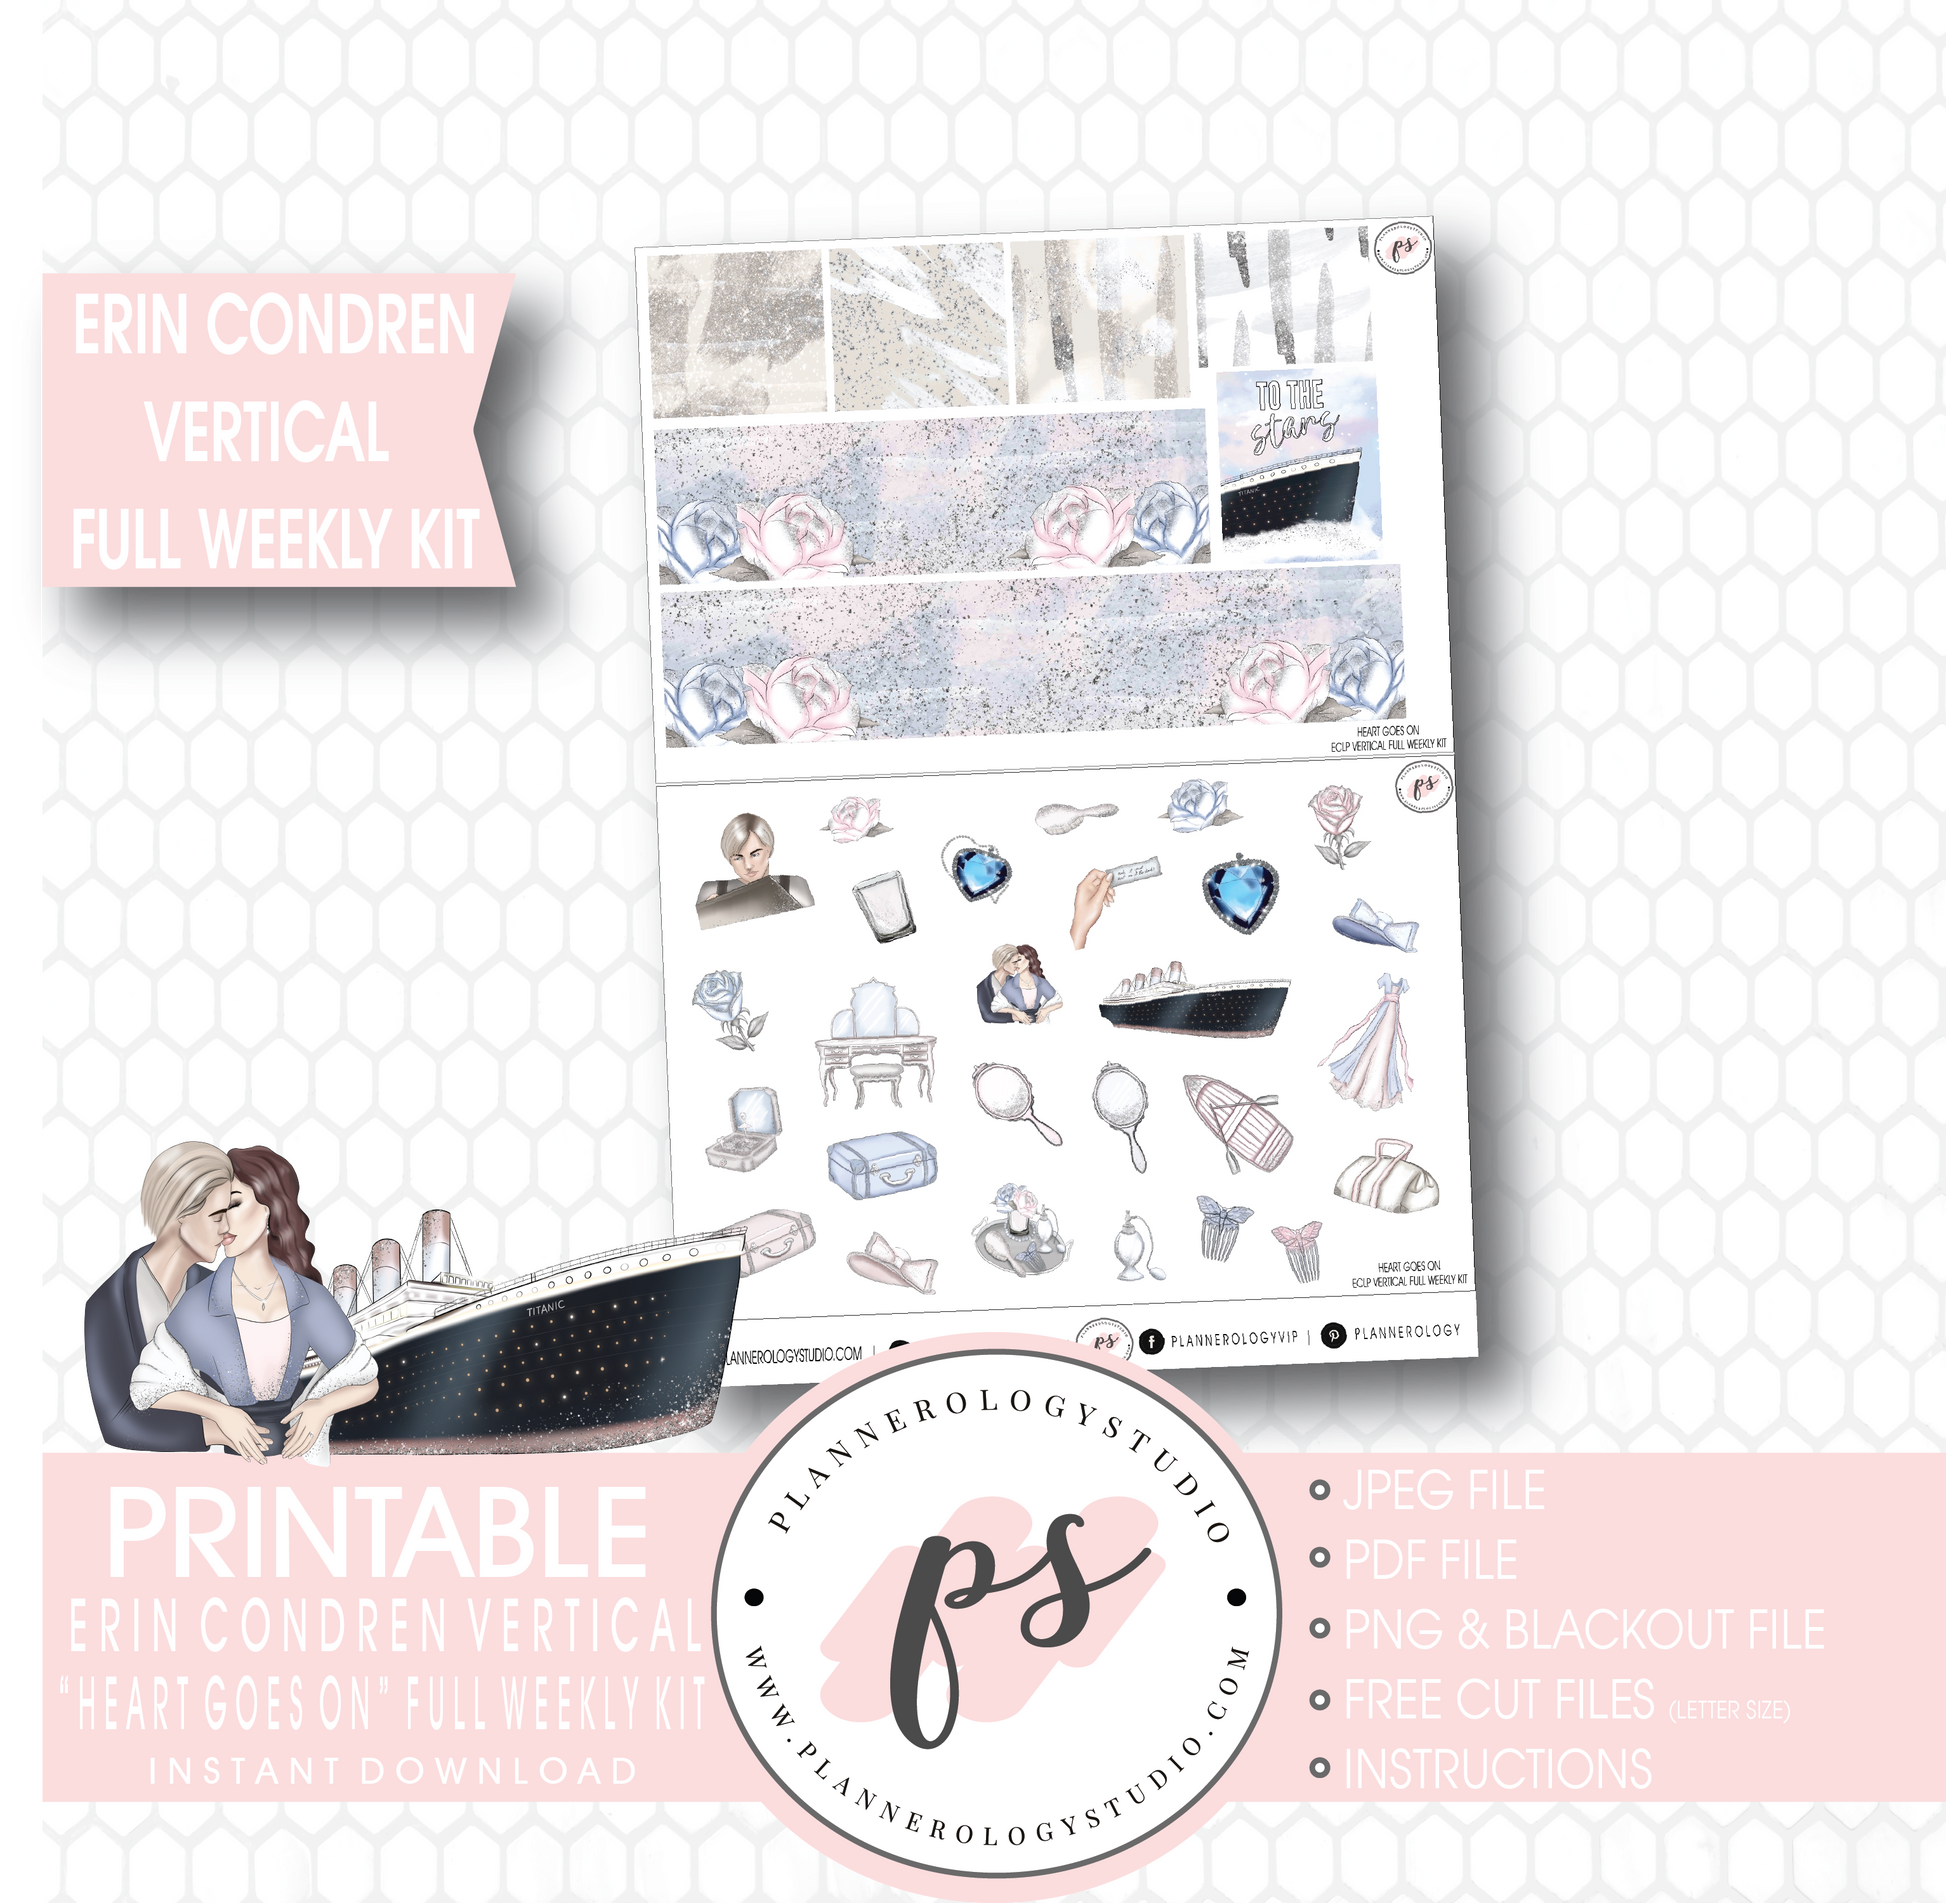 Heart Goes On (Titanic) Full Weekly Kit Printable Planner Stickers (for use with Erin Condren Vertical) - Plannerologystudio